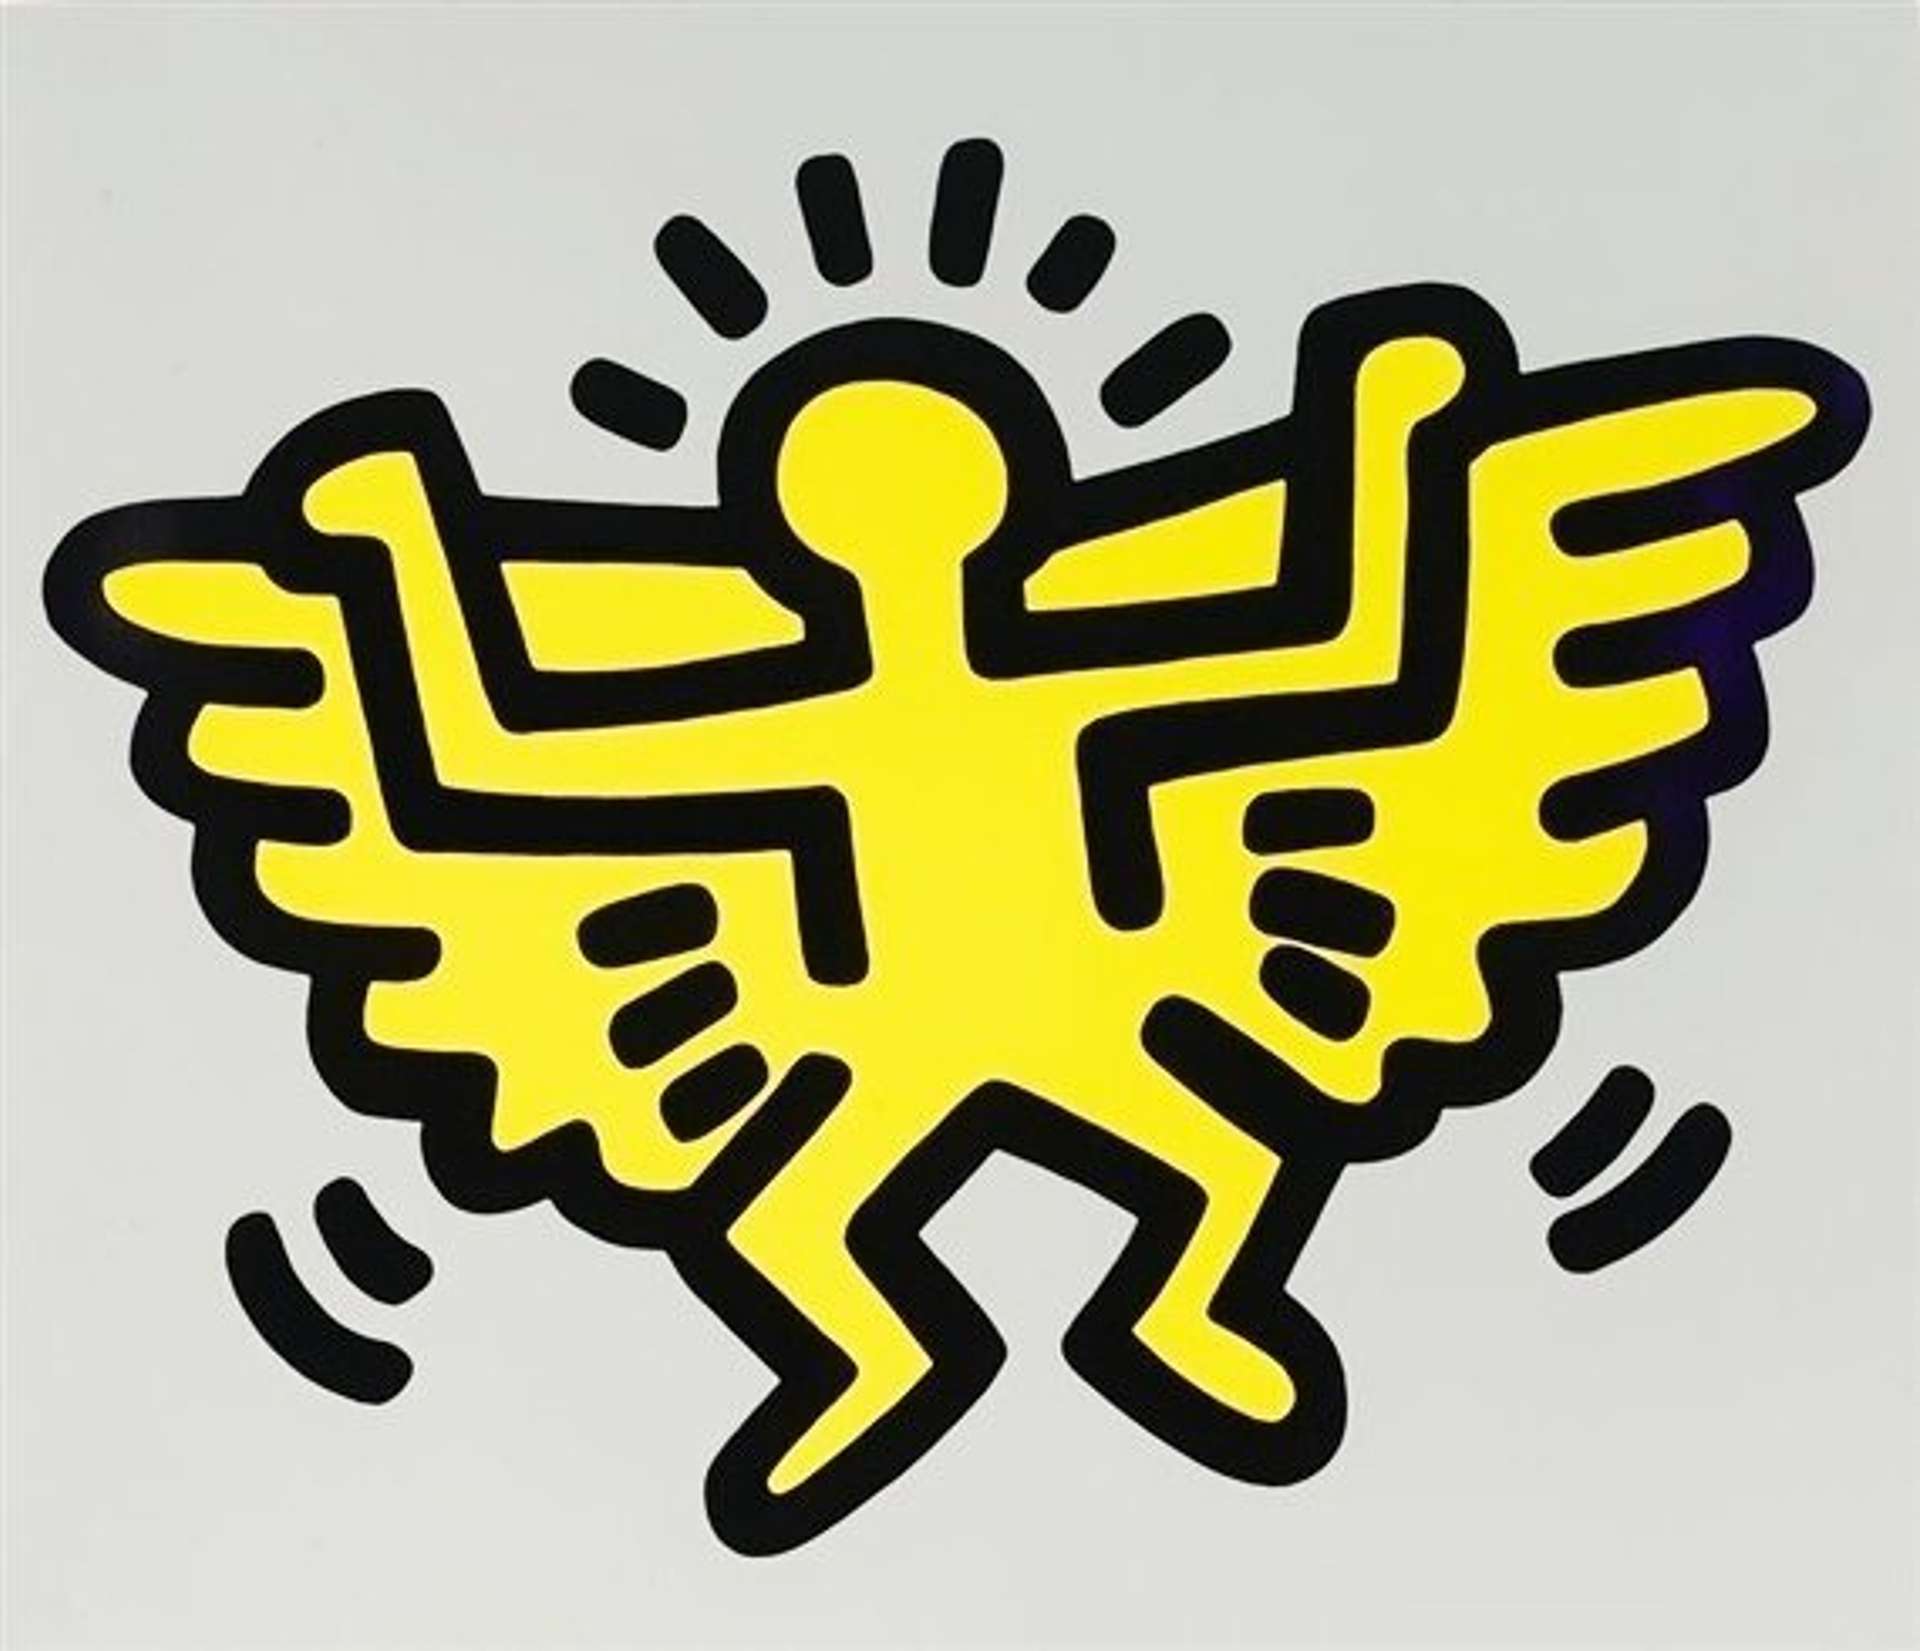 Angel by Keith Haring